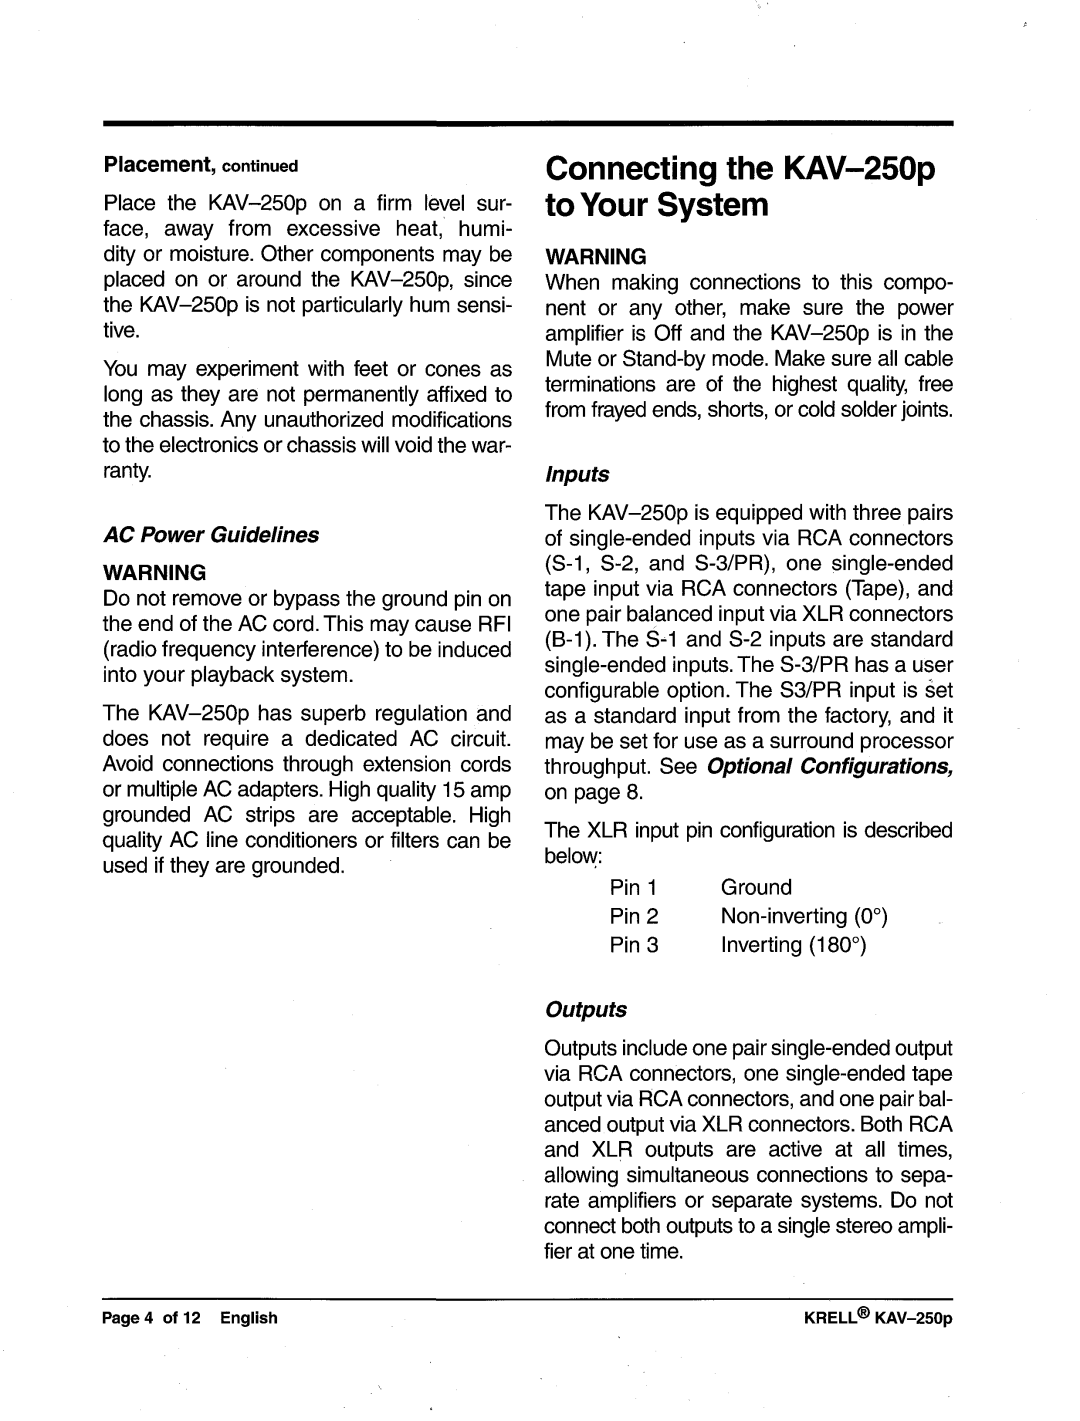 Krell Industries manual Connecting the KAV-250pto Your System, Placement,continued, ACPowerGuidelines, Inputs, Outputs 